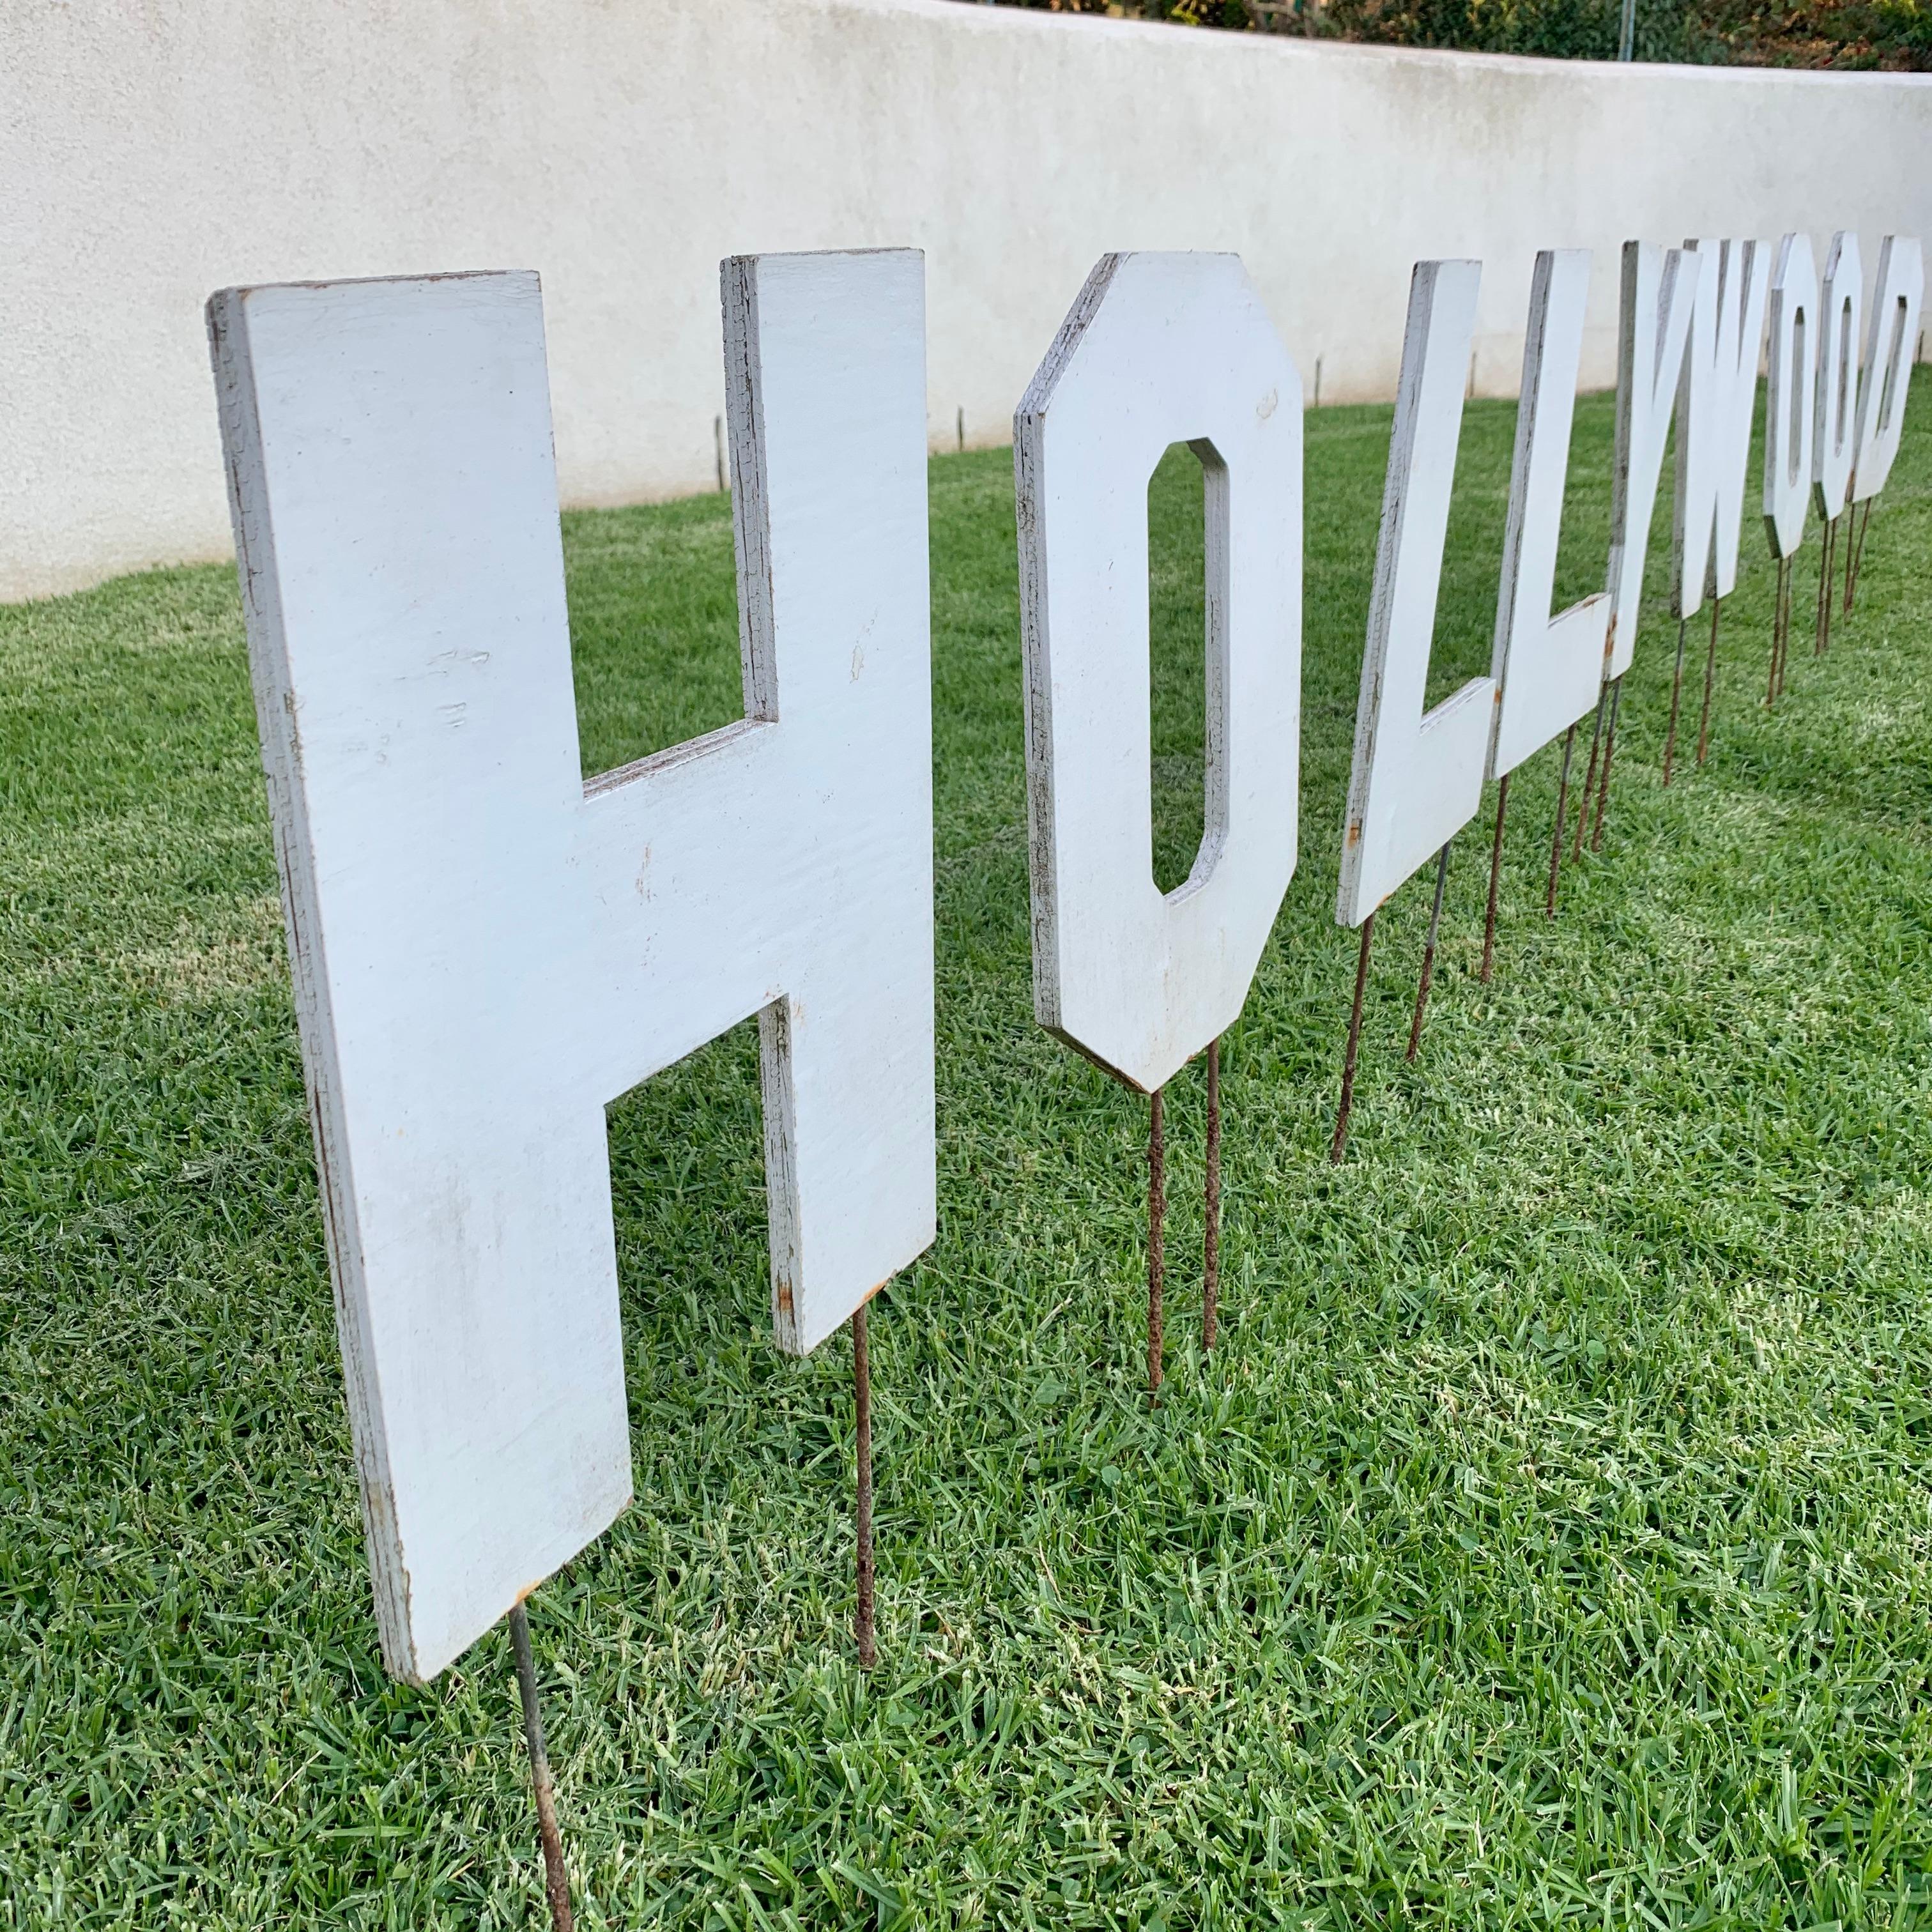 Fun piece of Los Angeles artwork. Hollywood sign made as an artist's model to make larger versions at a later time. Letters are perfect scale. Made of wood with metal rods attached to plant into the ground. Average letter size is 10.5